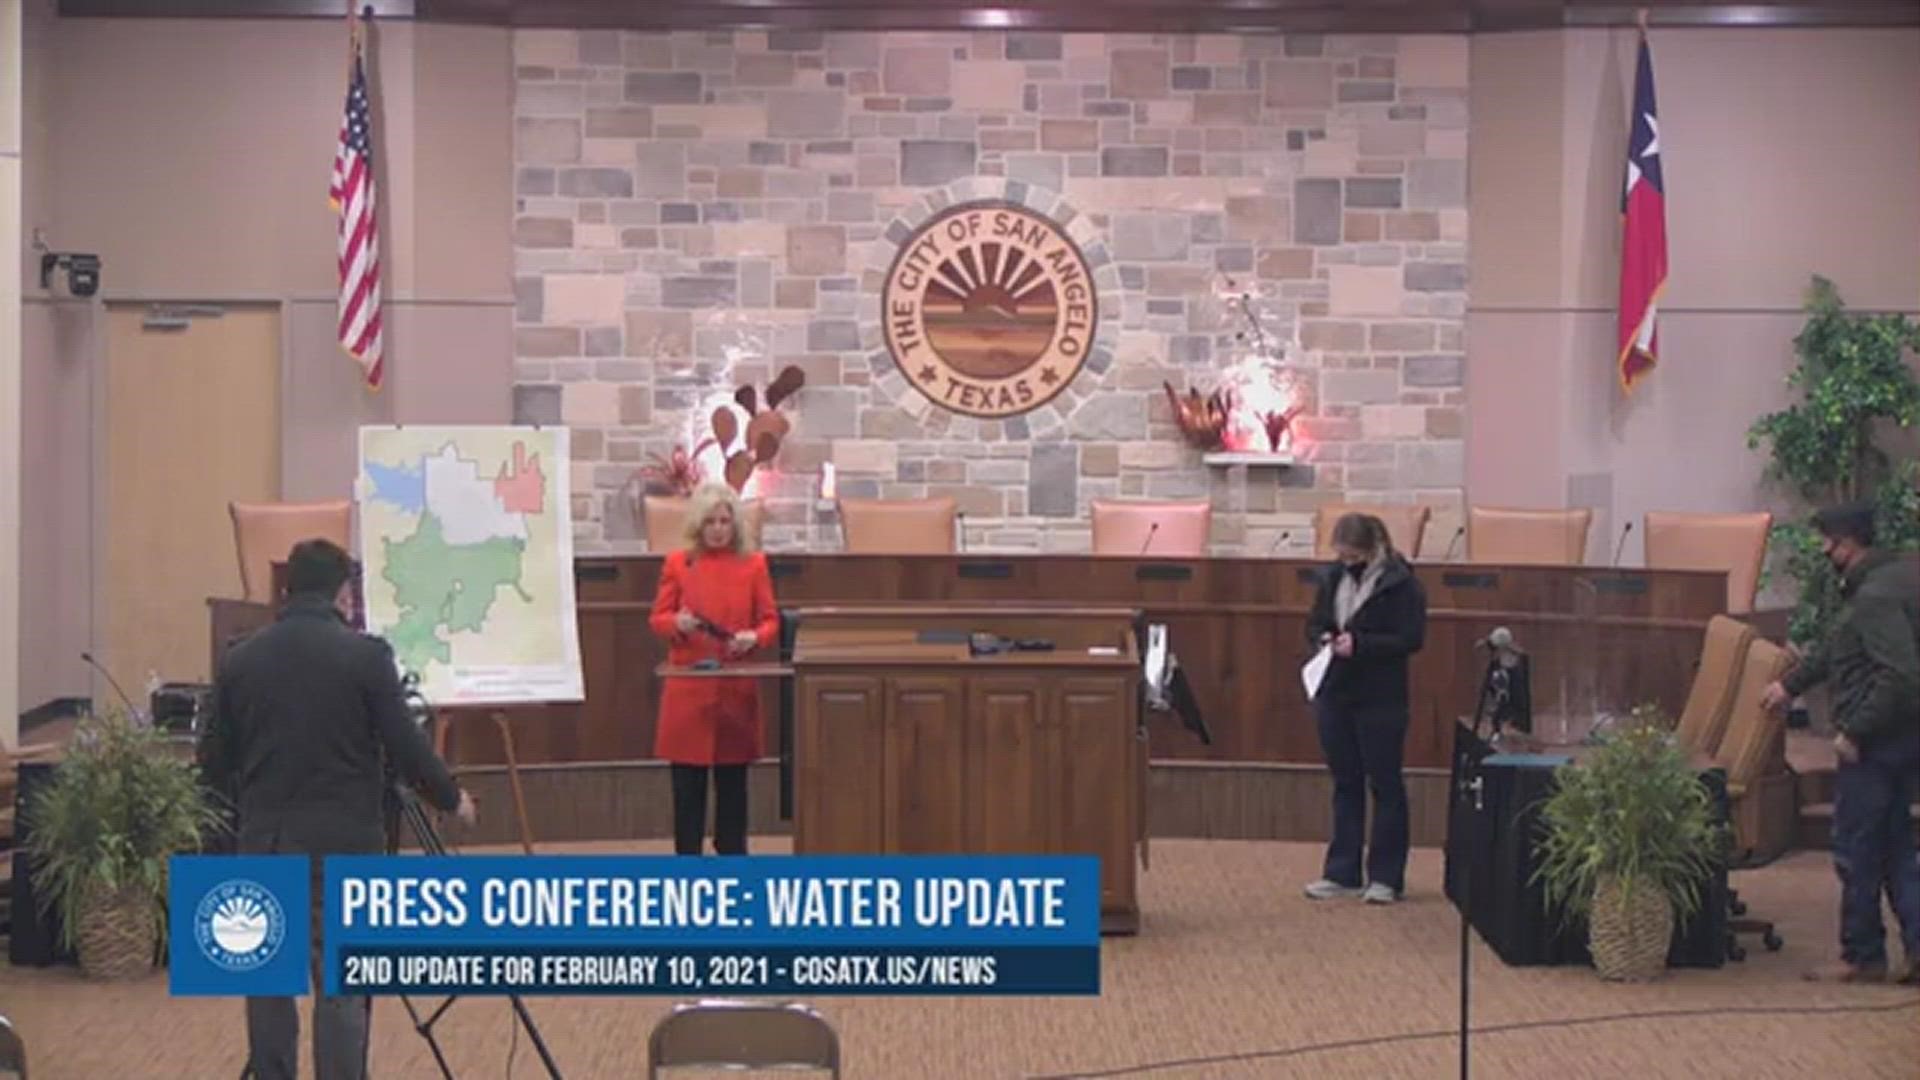 The City of San Angelo held a second press conference Wednesday with updates on the water advisory.